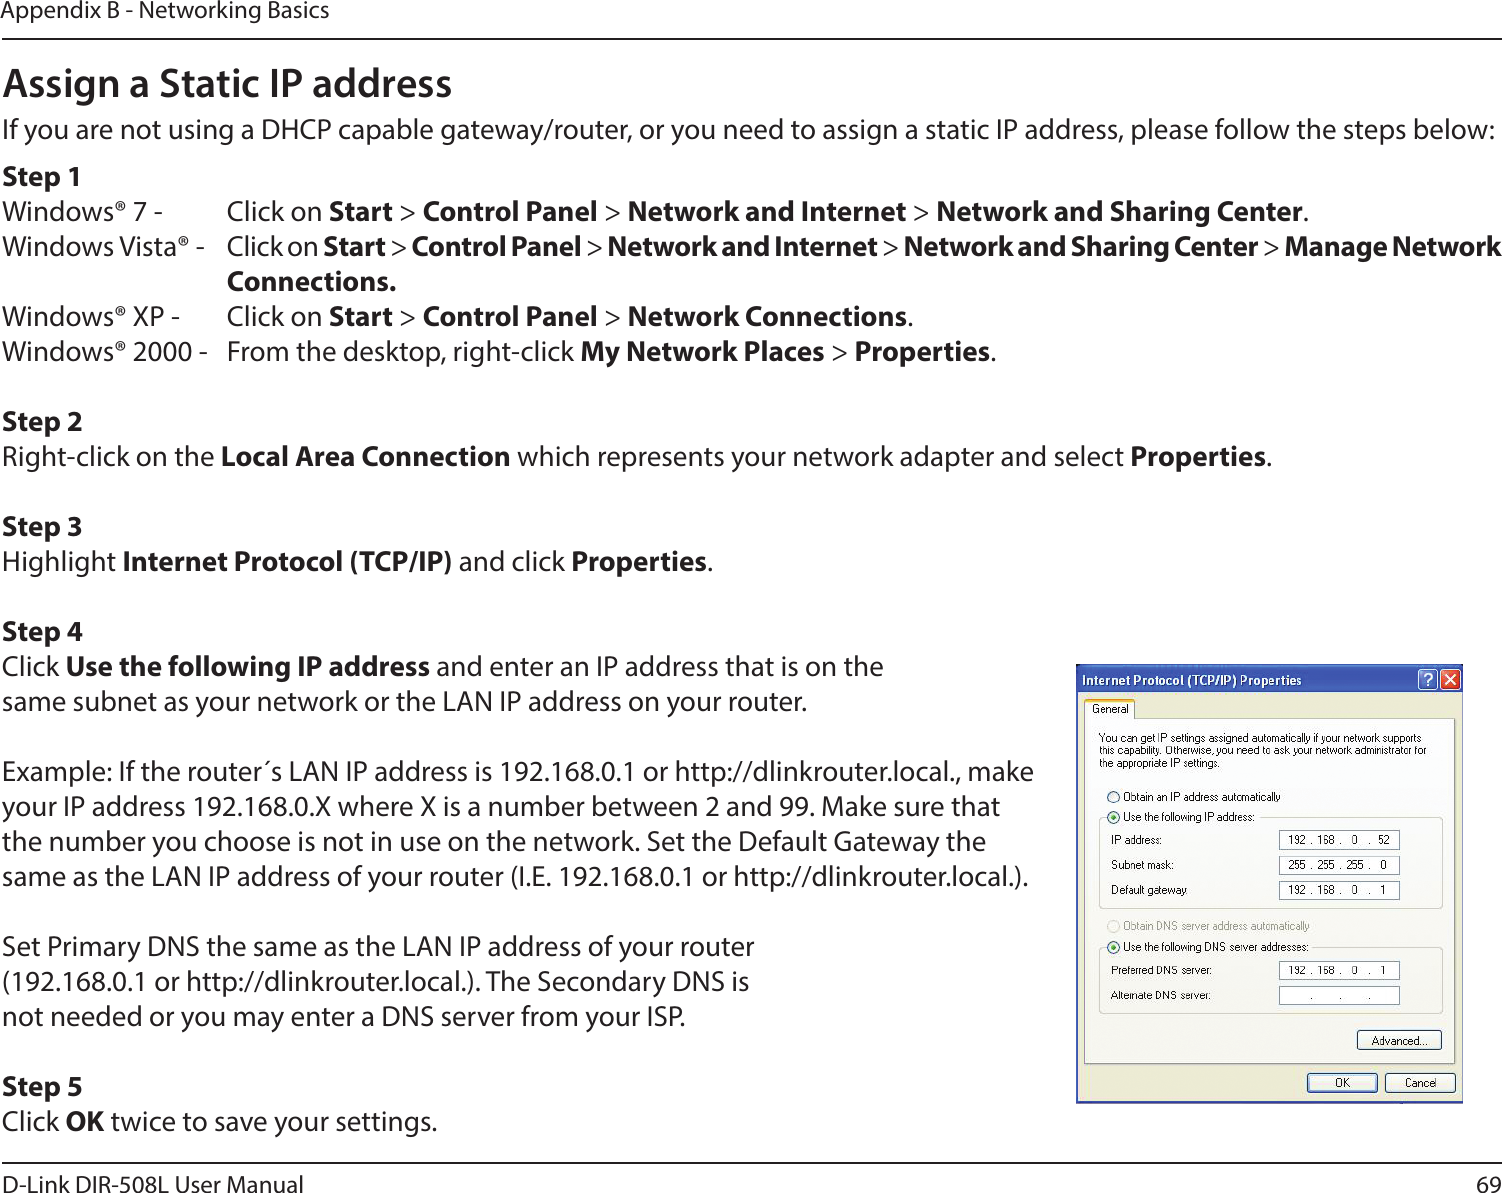 69D-Link DIR-508L User ManualAppendix B - Networking BasicsAssign a Static IP addressIf you are not using a DHCP capable gateway/router, or you need to assign a static IP address, please follow the steps below:Step 1Windows® 7 -  Click on Start &gt; Control Panel &gt; Network and Internet &gt; Network and Sharing Center.Windows Vista® -  Click on Start &gt; Control Panel &gt; Network and Internet &gt; Network and Sharing Center &gt; Manage Network    Connections.Windows® XP -  Click on Start &gt; Control Panel &gt; Network Connections.Windows® 2000 -  From the desktop, right-click My Network Places &gt; Properties.Step 2Right-click on the Local Area Connection which represents your network adapter and select Properties.Step 3Highlight Internet Protocol (TCP/IP) and click Properties.Step 4Click Use the following IP address and enter an IP address that is on the same subnet as your network or the LAN IP address on your router. Example: If the router´s LAN IP address is 192.168.0.1 or http://dlinkrouter.local., make your IP address 192.168.0.X where X is a number between 2 and 99. Make sure that the number you choose is not in use on the network. Set the Default Gateway the same as the LAN IP address of your router (I.E. 192.168.0.1 or http://dlinkrouter.local.). Set Primary DNS the same as the LAN IP address of your router (192.168.0.1 or http://dlinkrouter.local.). The Secondary DNS is not needed or you may enter a DNS server from your ISP.Step 5Click OK twice to save your settings.